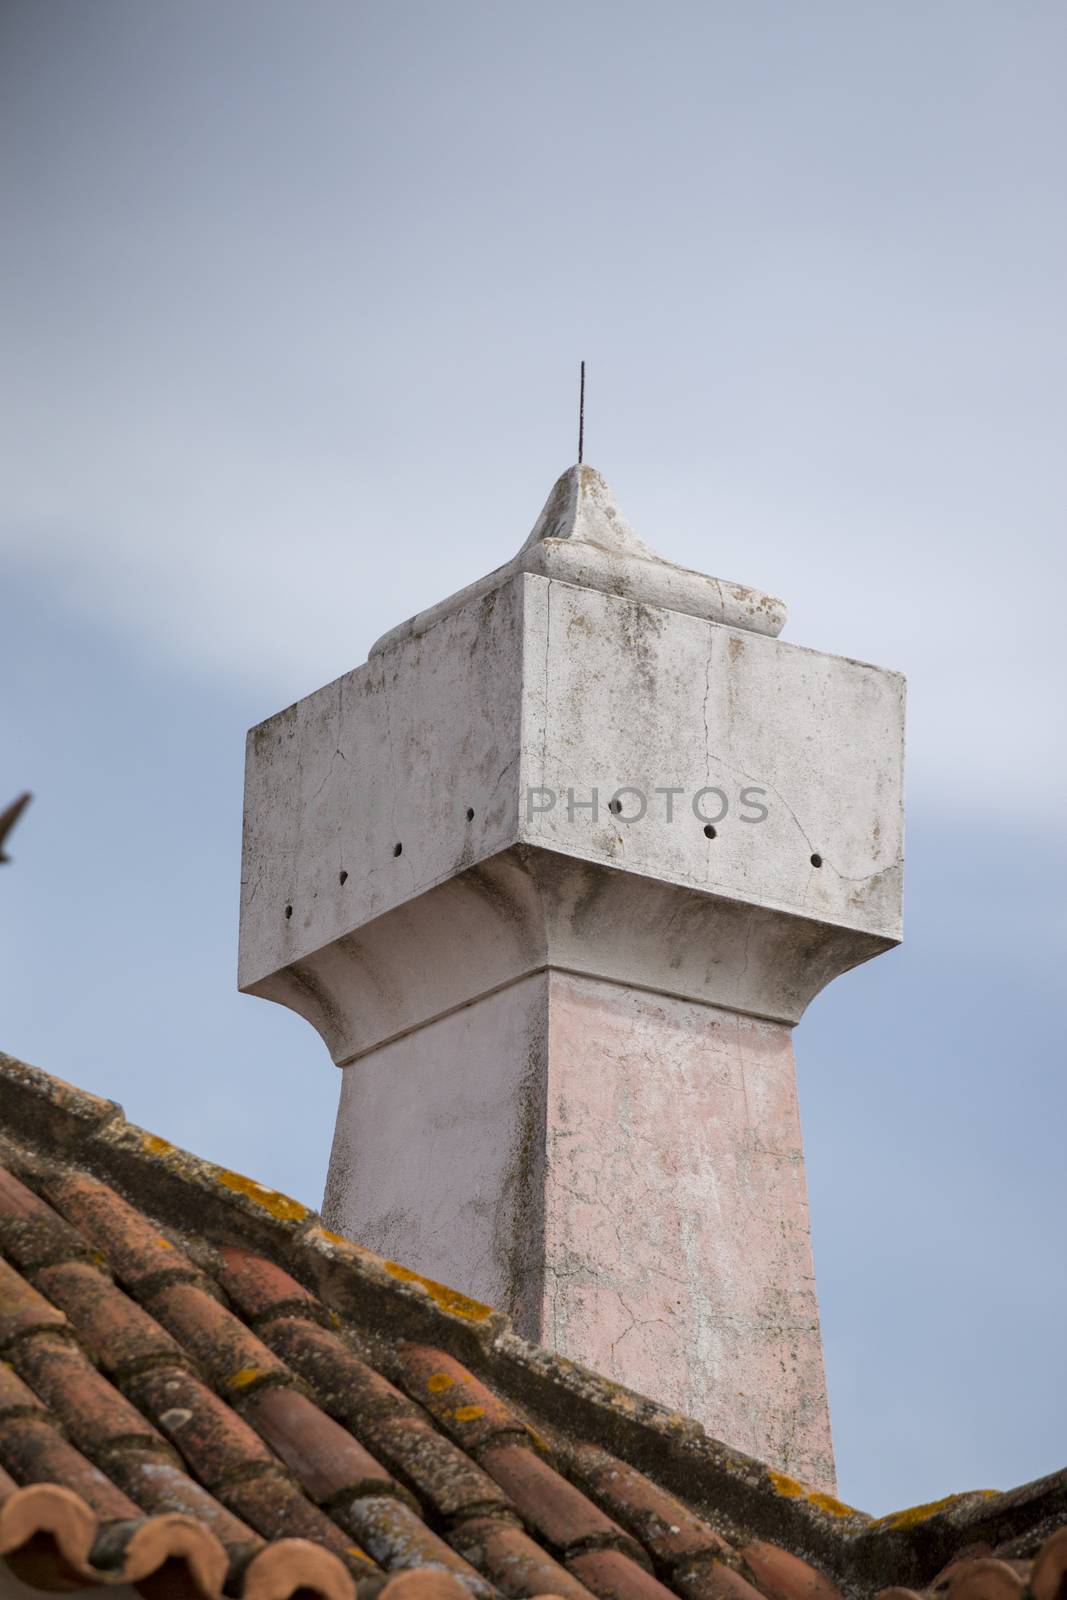 Typical chimneys on red tile roofs in Portuguese architecture.